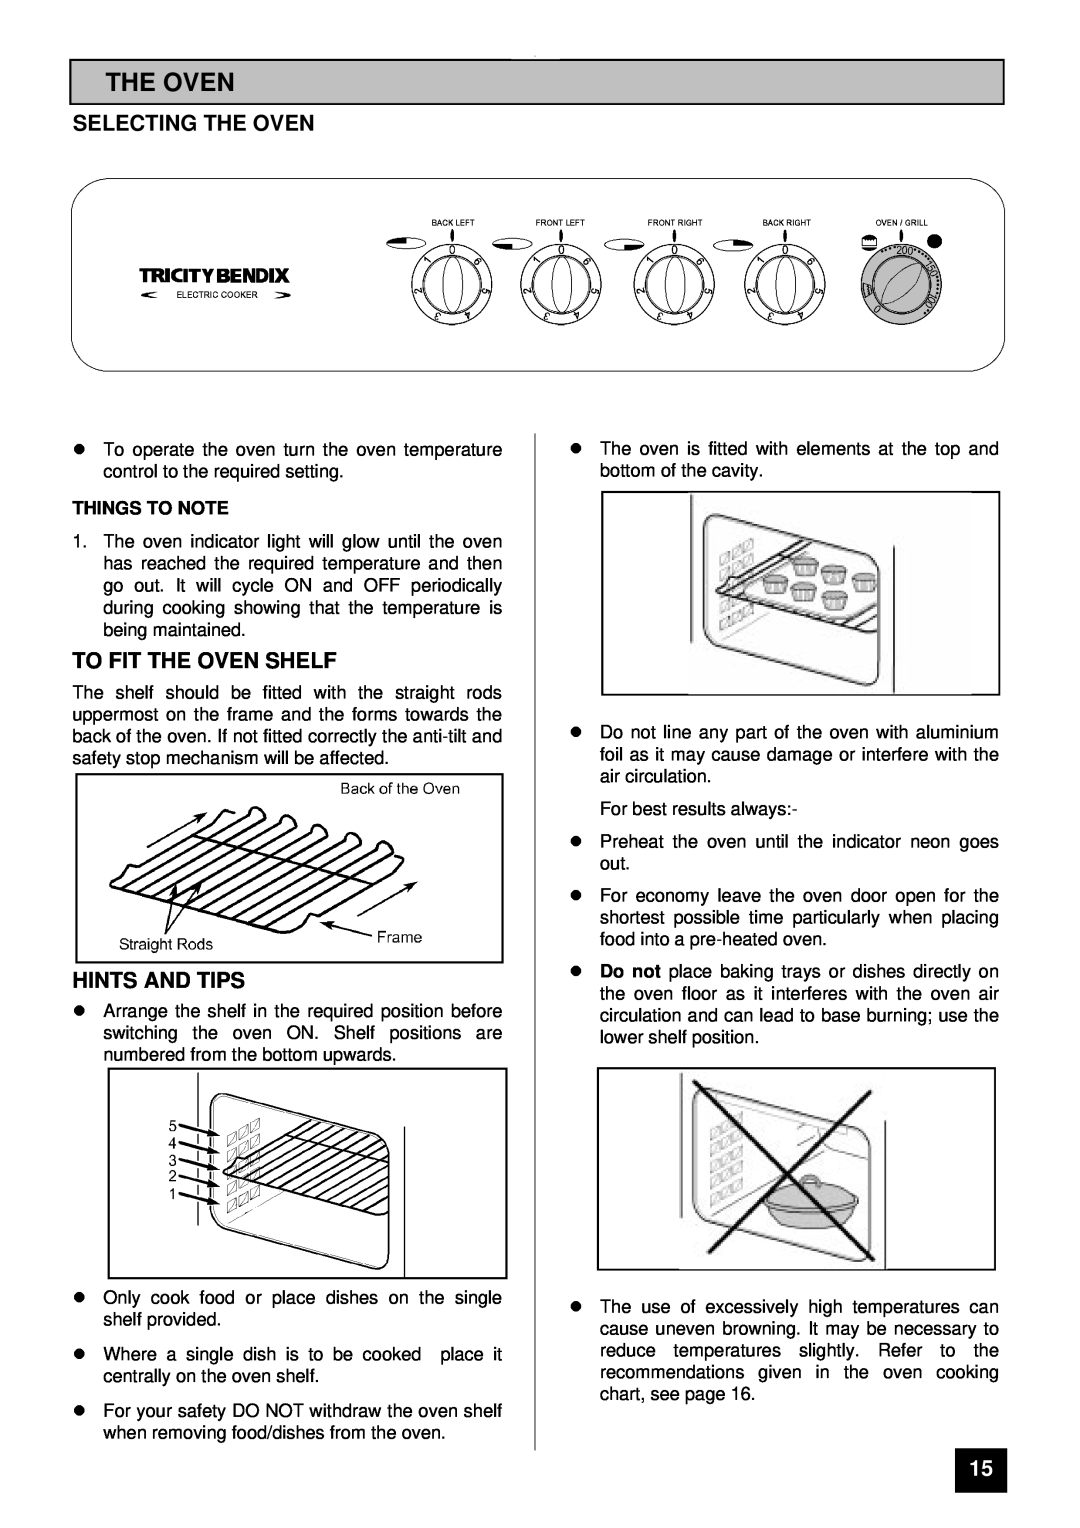 Tricity Bendix SI 221 Selecting The Oven, To Fit The Oven Shelf, lHINTS AND TIPS, Things To Note 